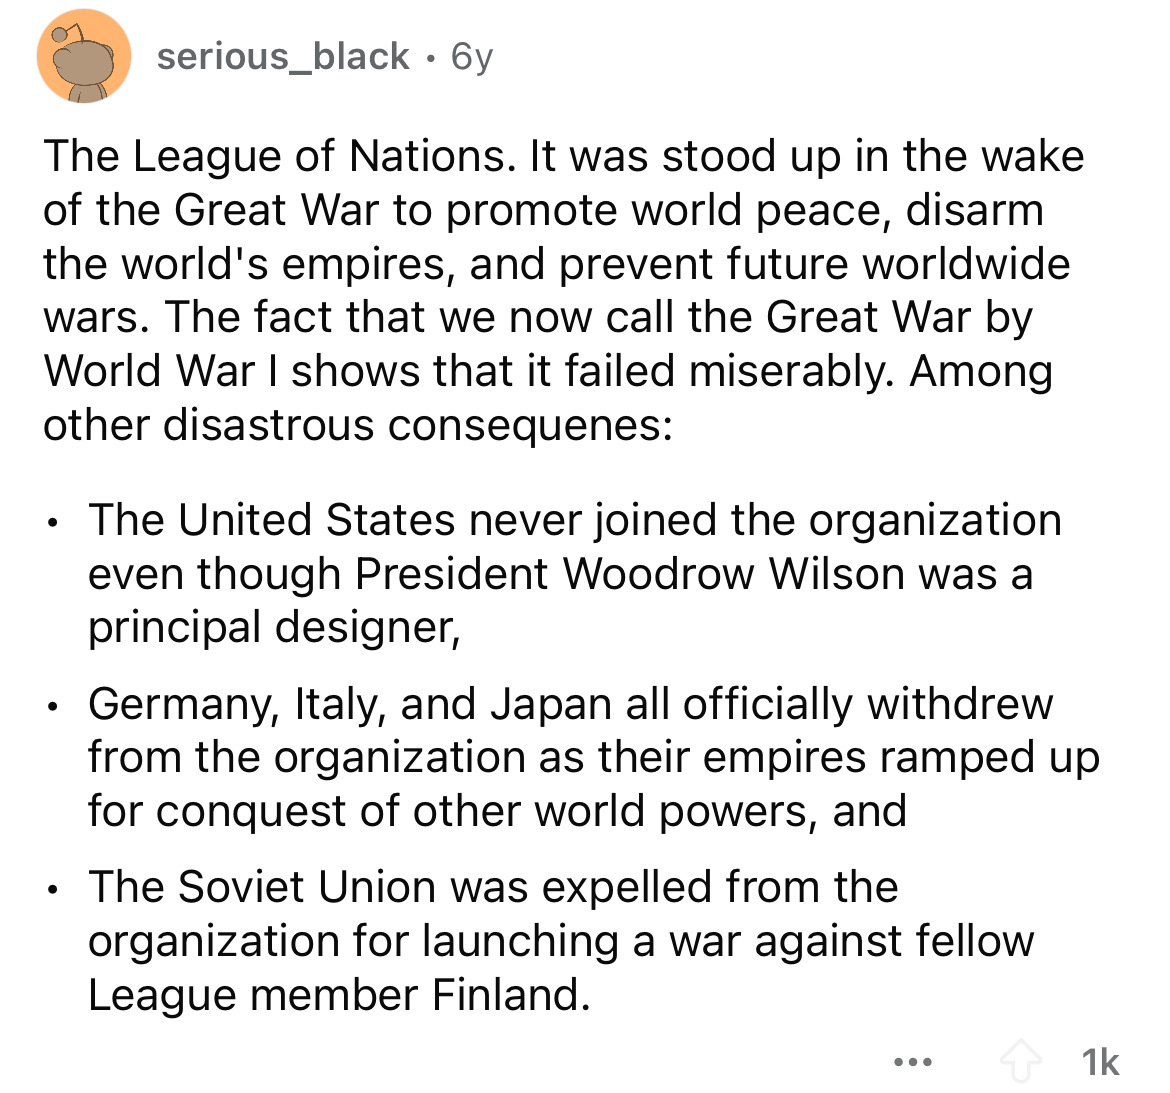 number - . serious_black 6y . The League of Nations. It was stood up in the wake of the Great War to promote world peace, disarm the world's empires, and prevent future worldwide wars. The fact that we now call the Great War by World War I shows that it f